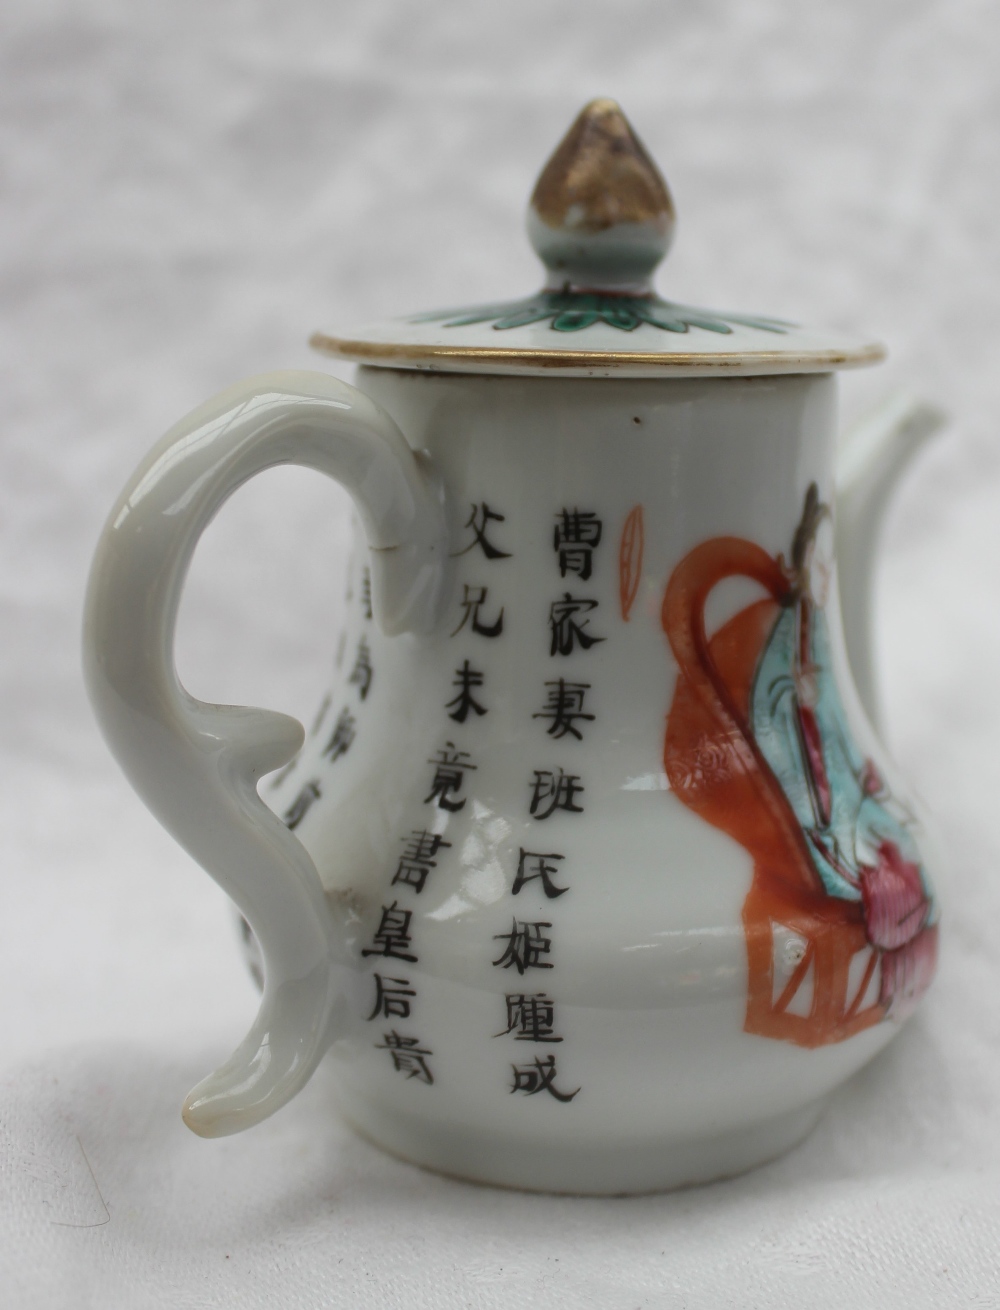 A Chinese porcelain miniature teapot, painted with figures and text, - Image 5 of 11